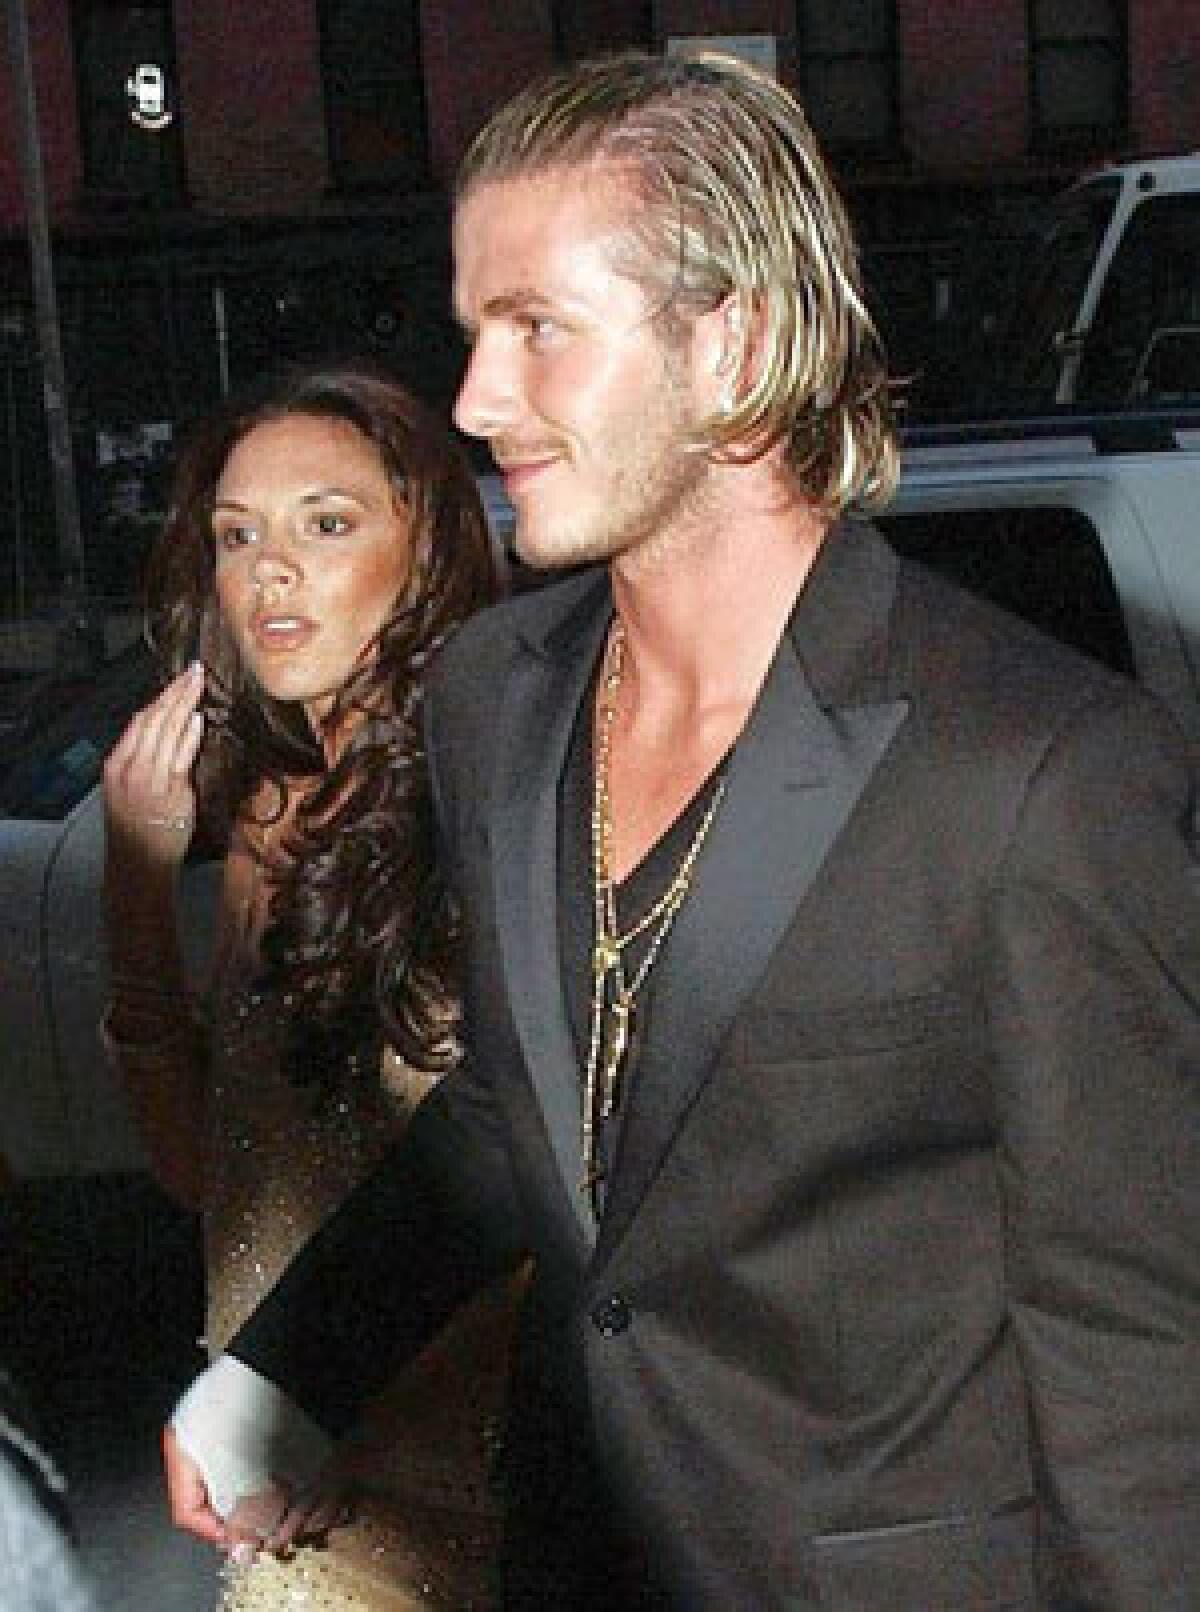 Soccer star David Beckham and wife Victoria arrive at a Vogue magazine party in 2003.